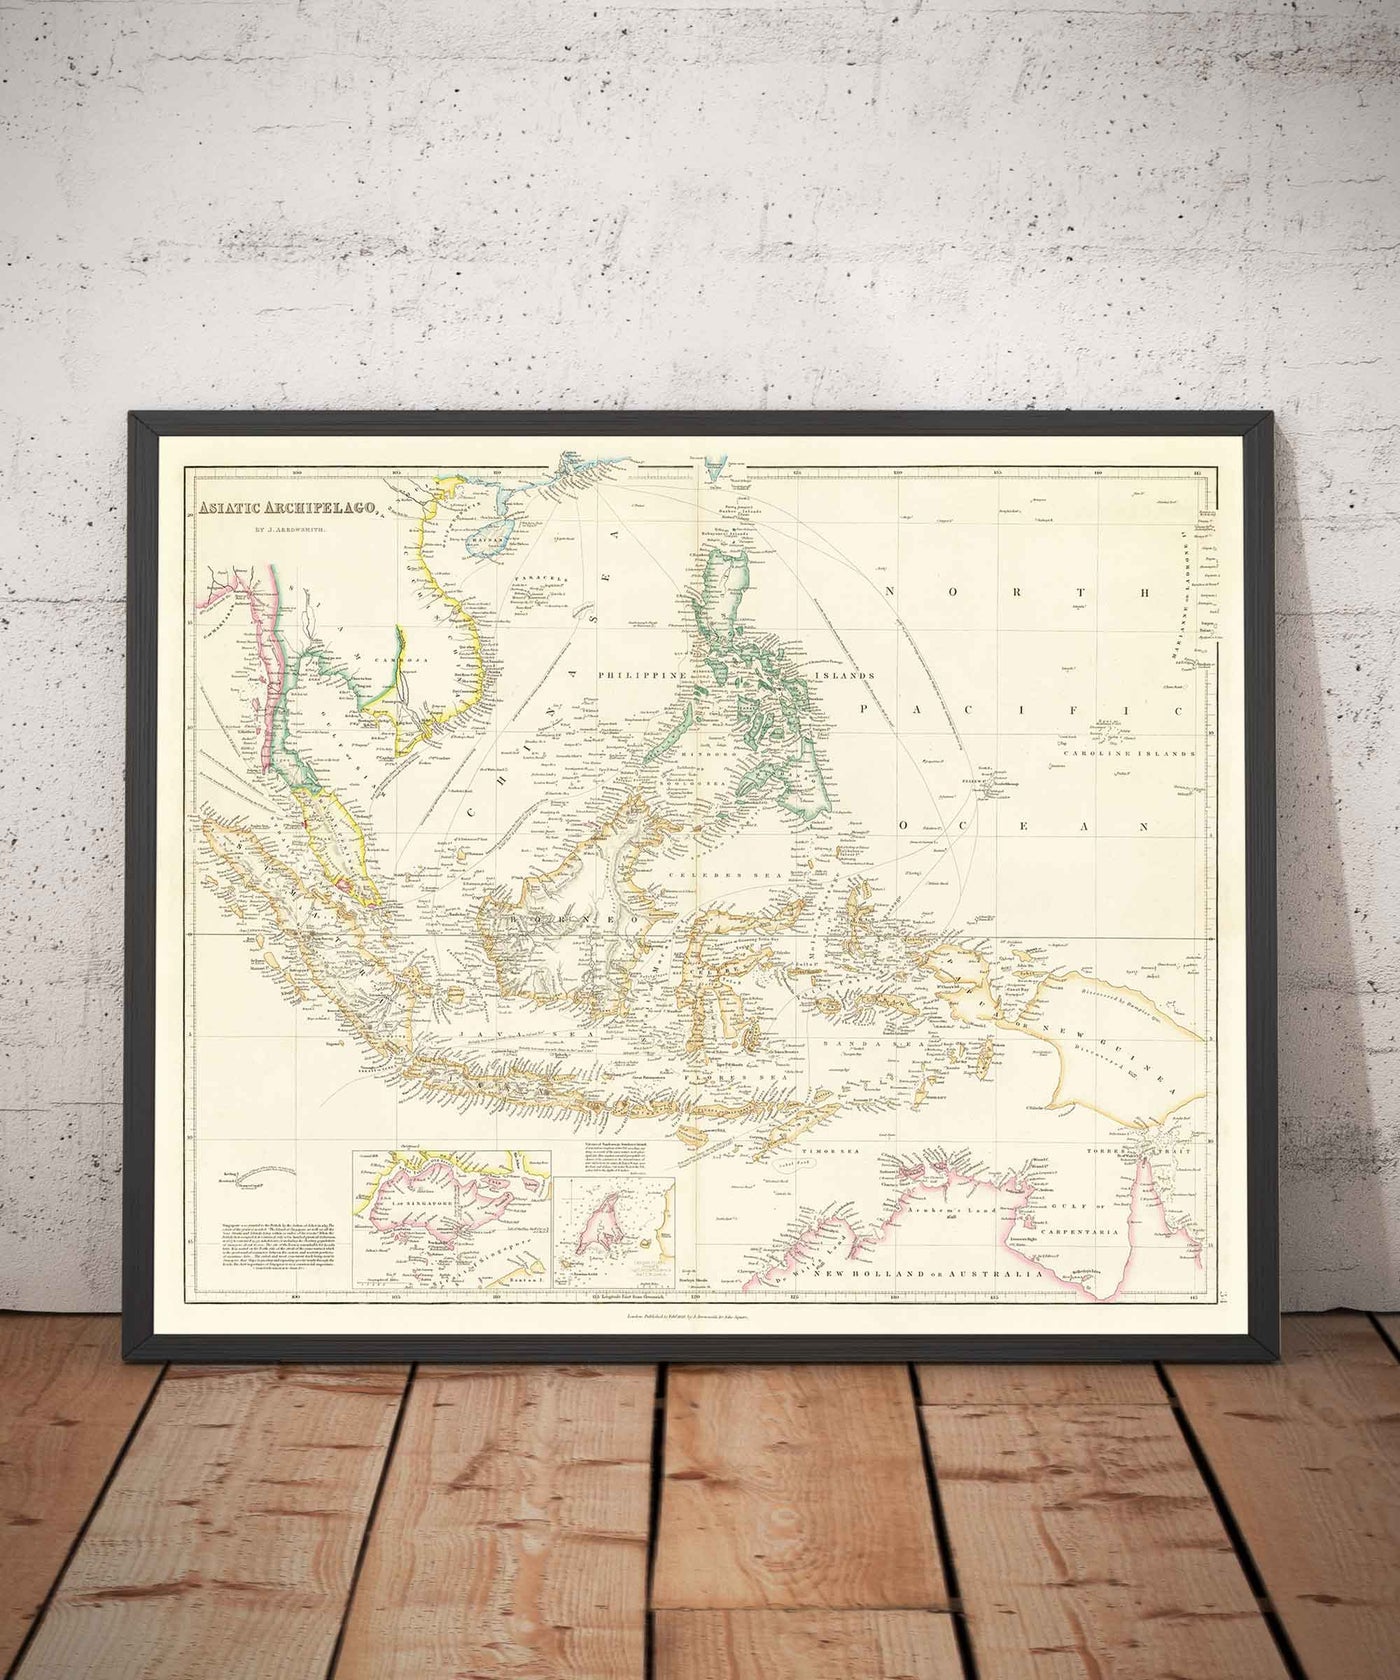 Old Map of Malay Archipelago & East Indies by Arrowsmith, 1859 - Southeast Asia, Philippines, Islands, Straits, Singapore